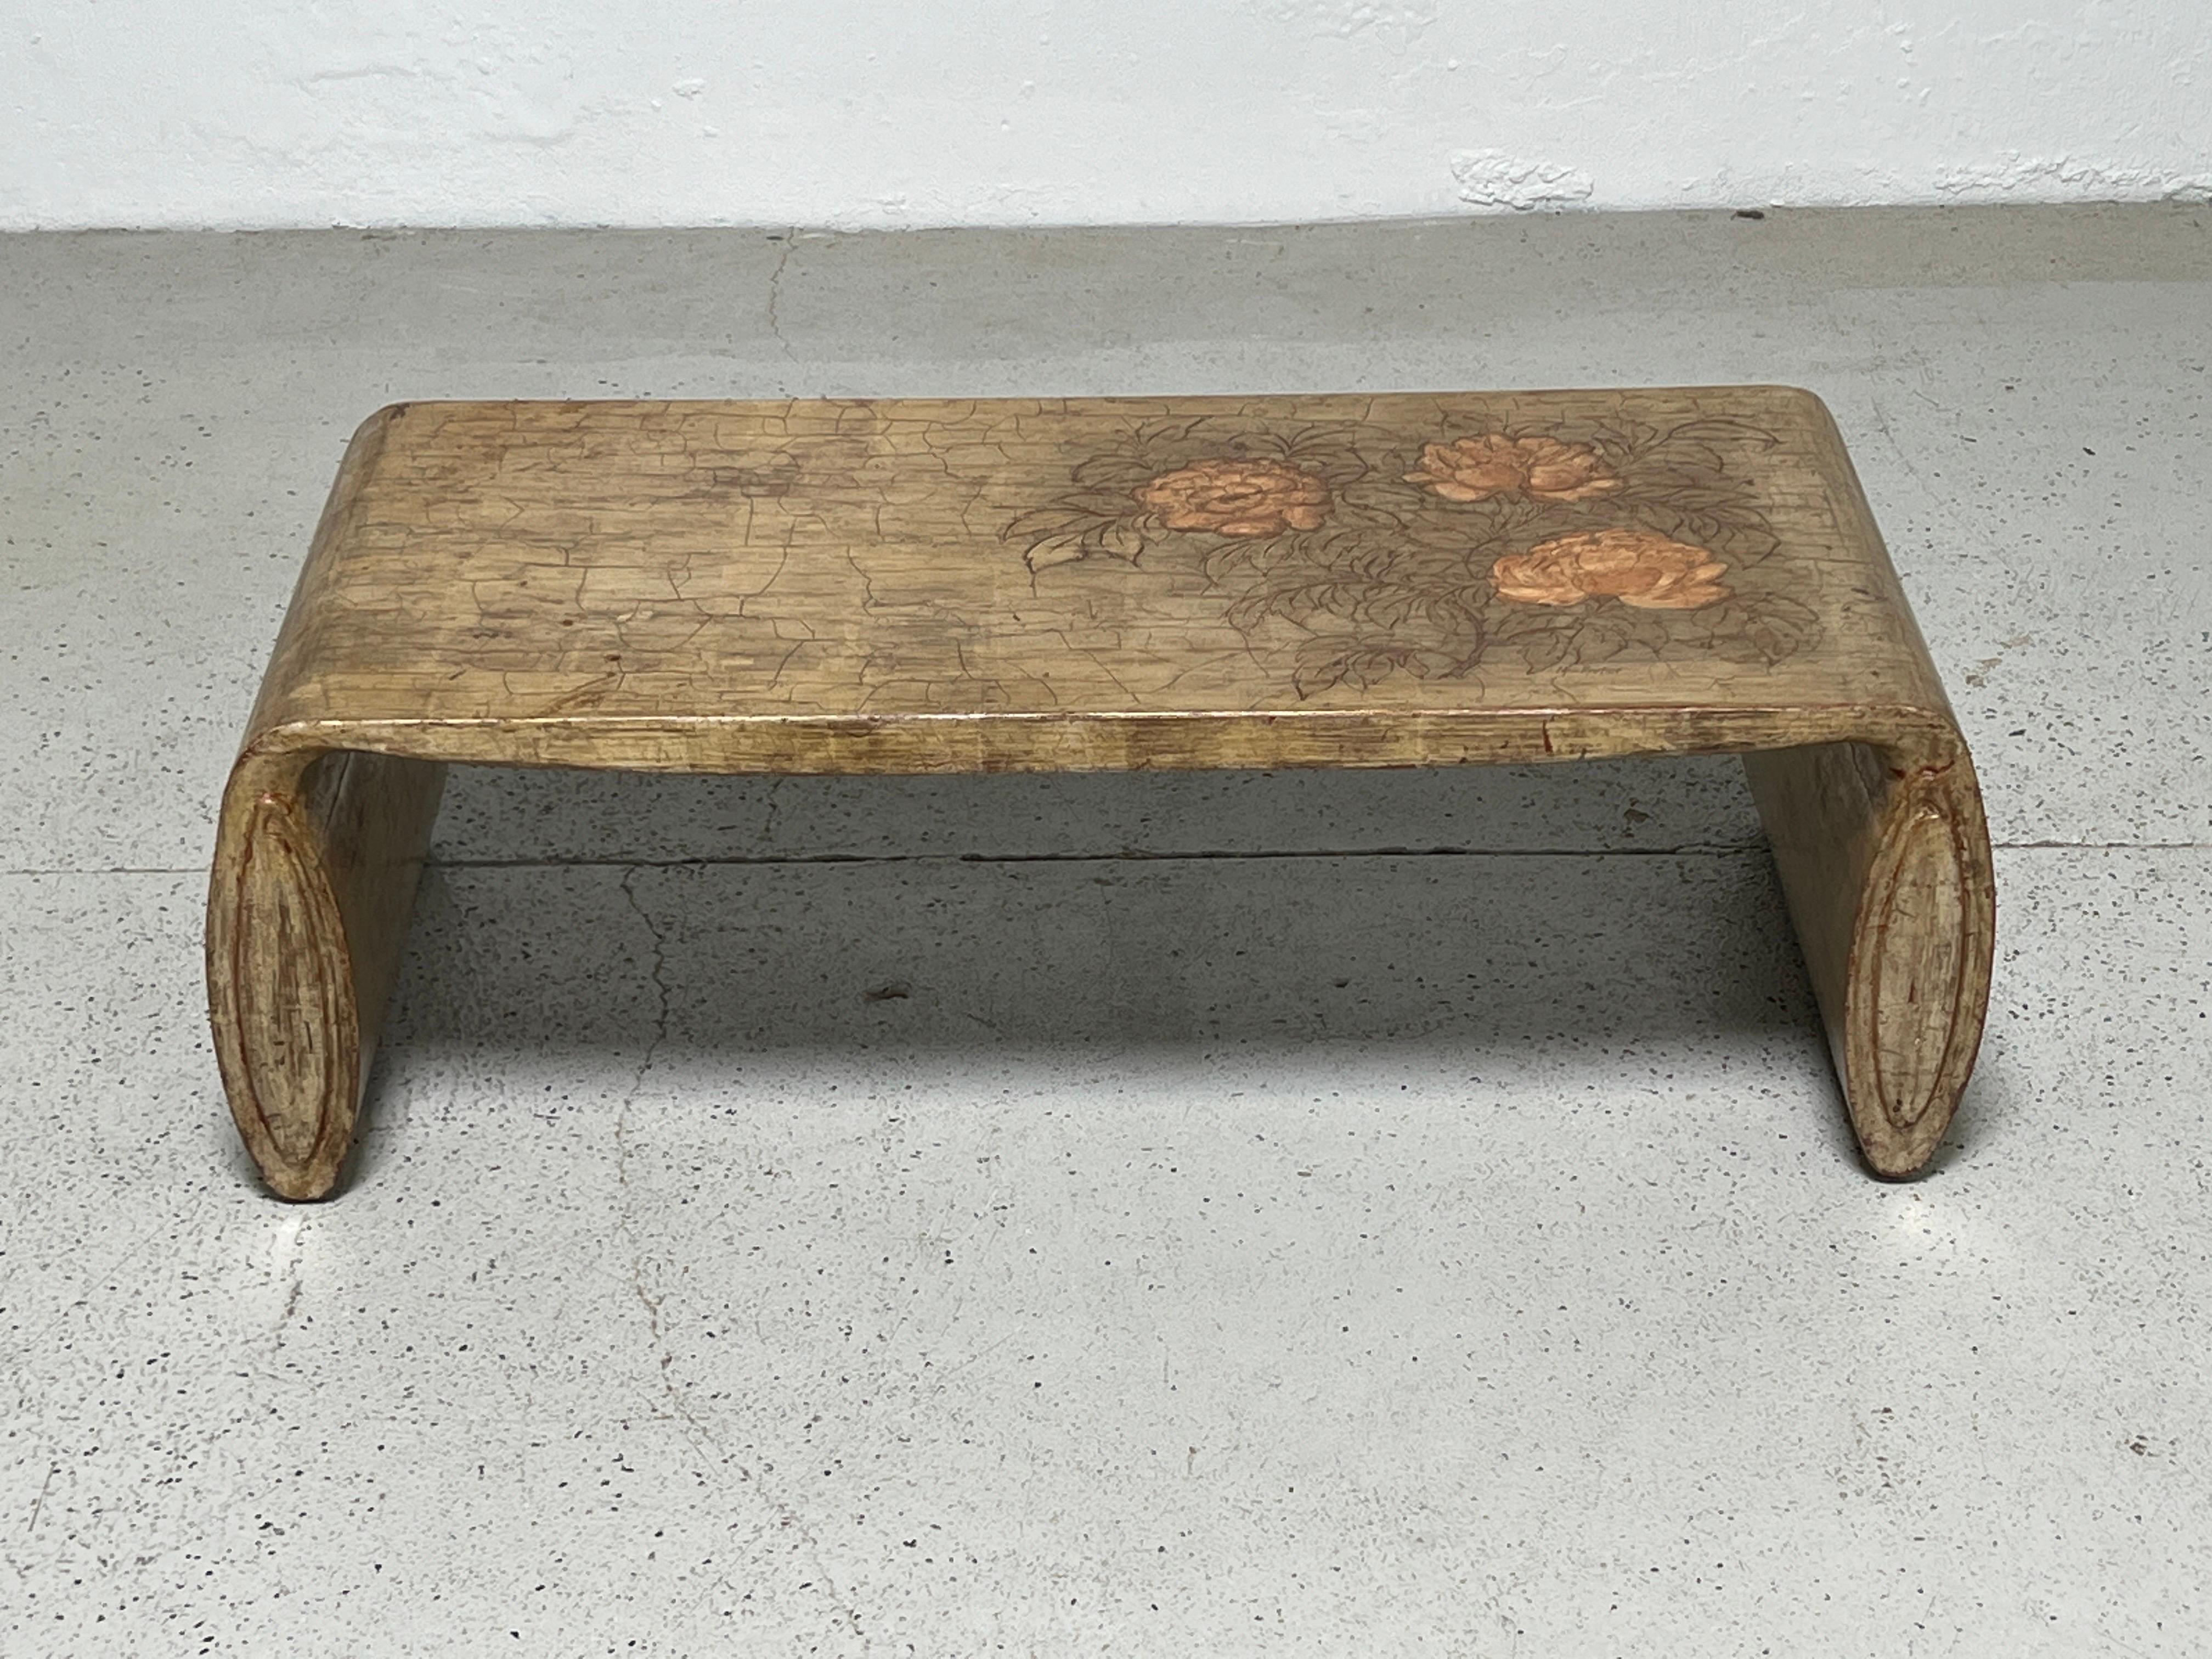 Max Kuehne Gilt Wood Coffee Table, 1935 In Good Condition For Sale In Dallas, TX